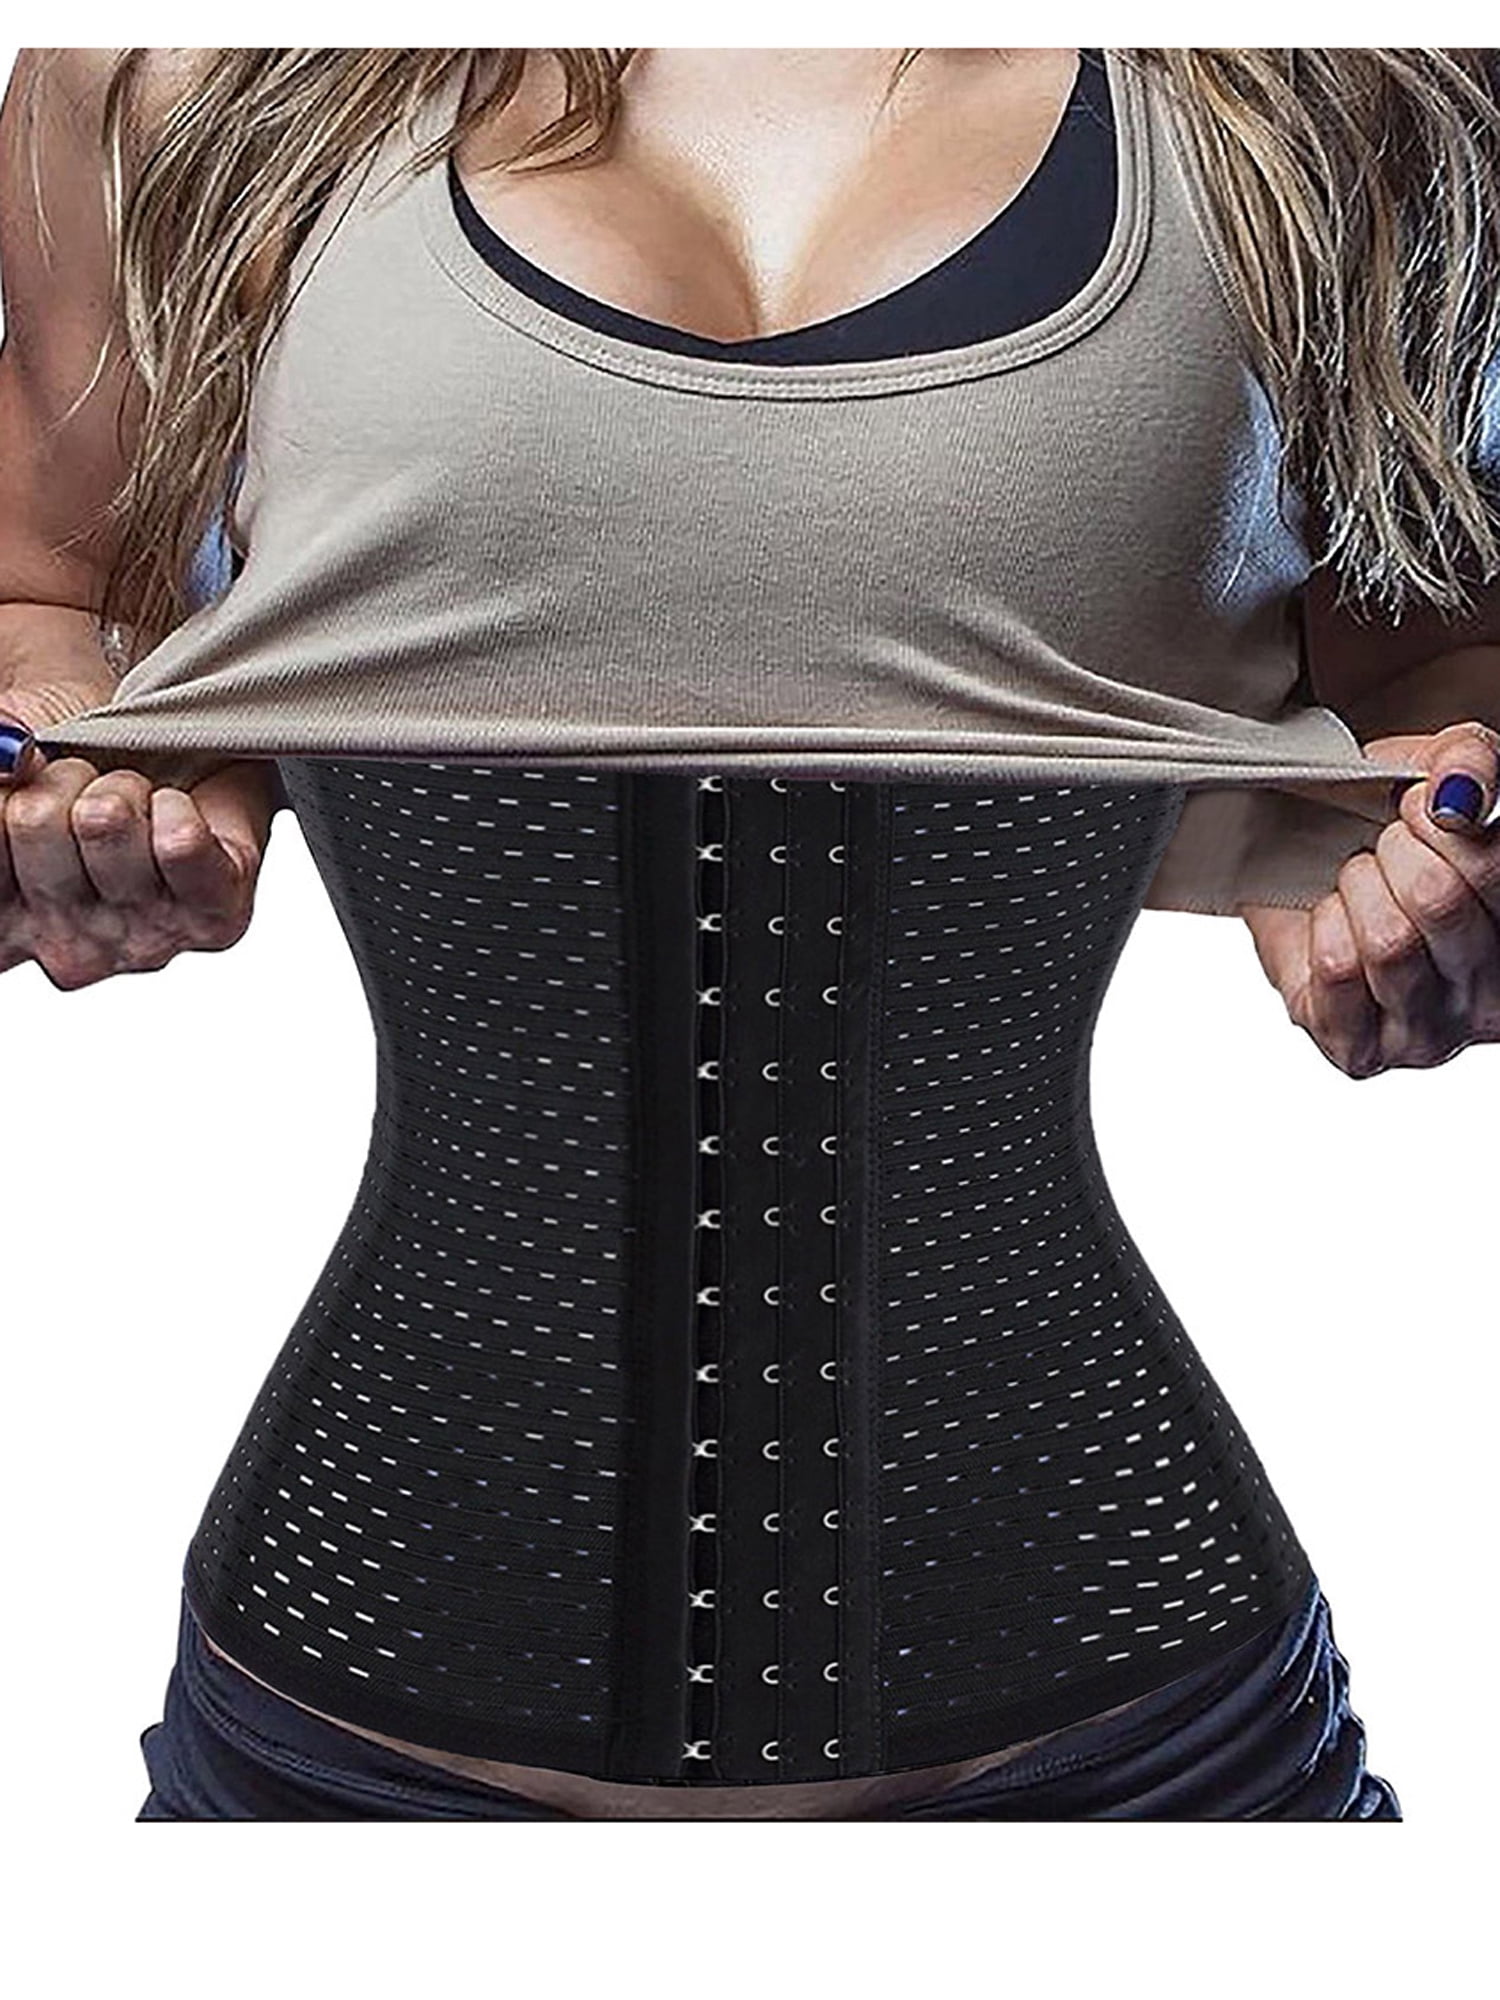 Youloveit Aist Trainer Corset Breathable and Invisible Waist Shaper Training Waist Tightener for Female Abdominal Control Slimming and Shaping Belly